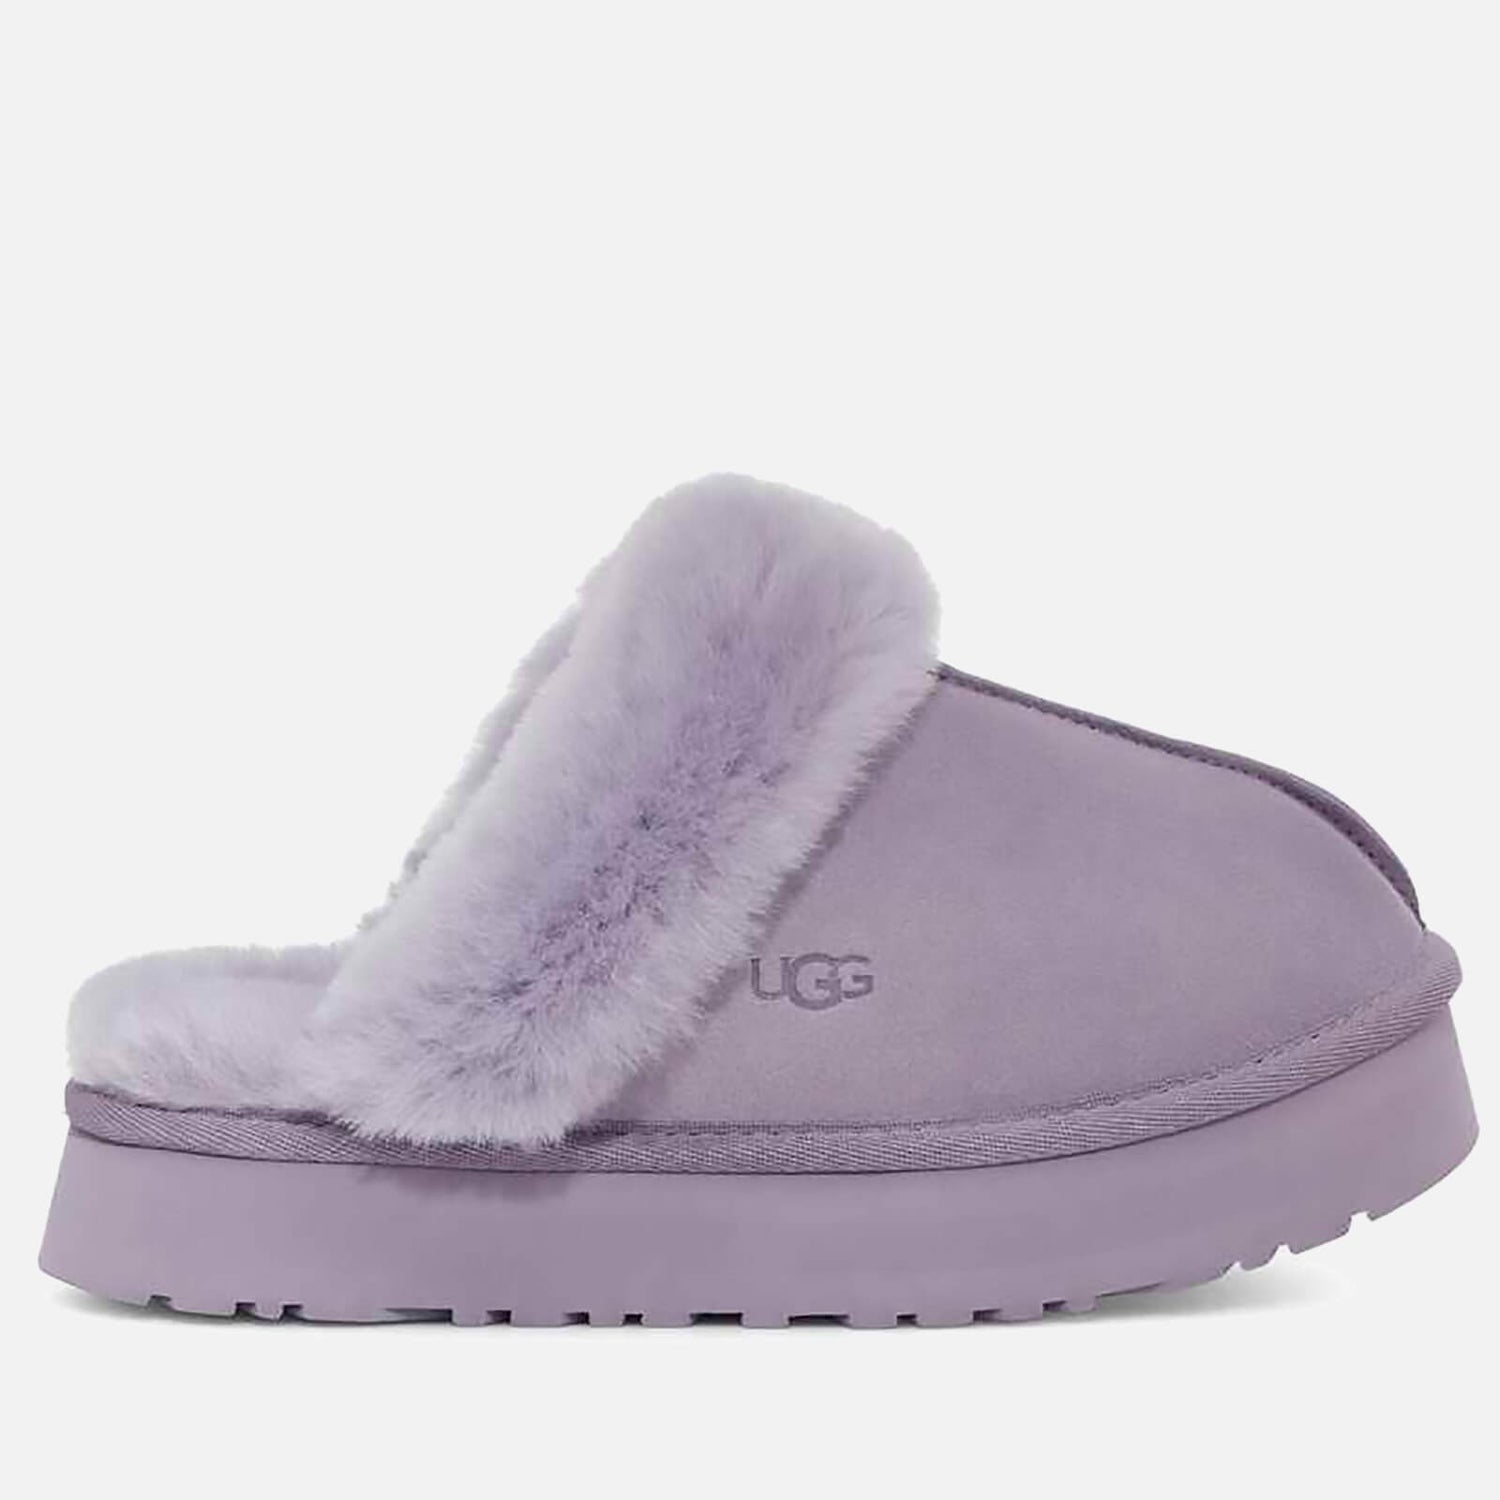 UGG Disquette Suede and Sheepskin Slipper Sliders